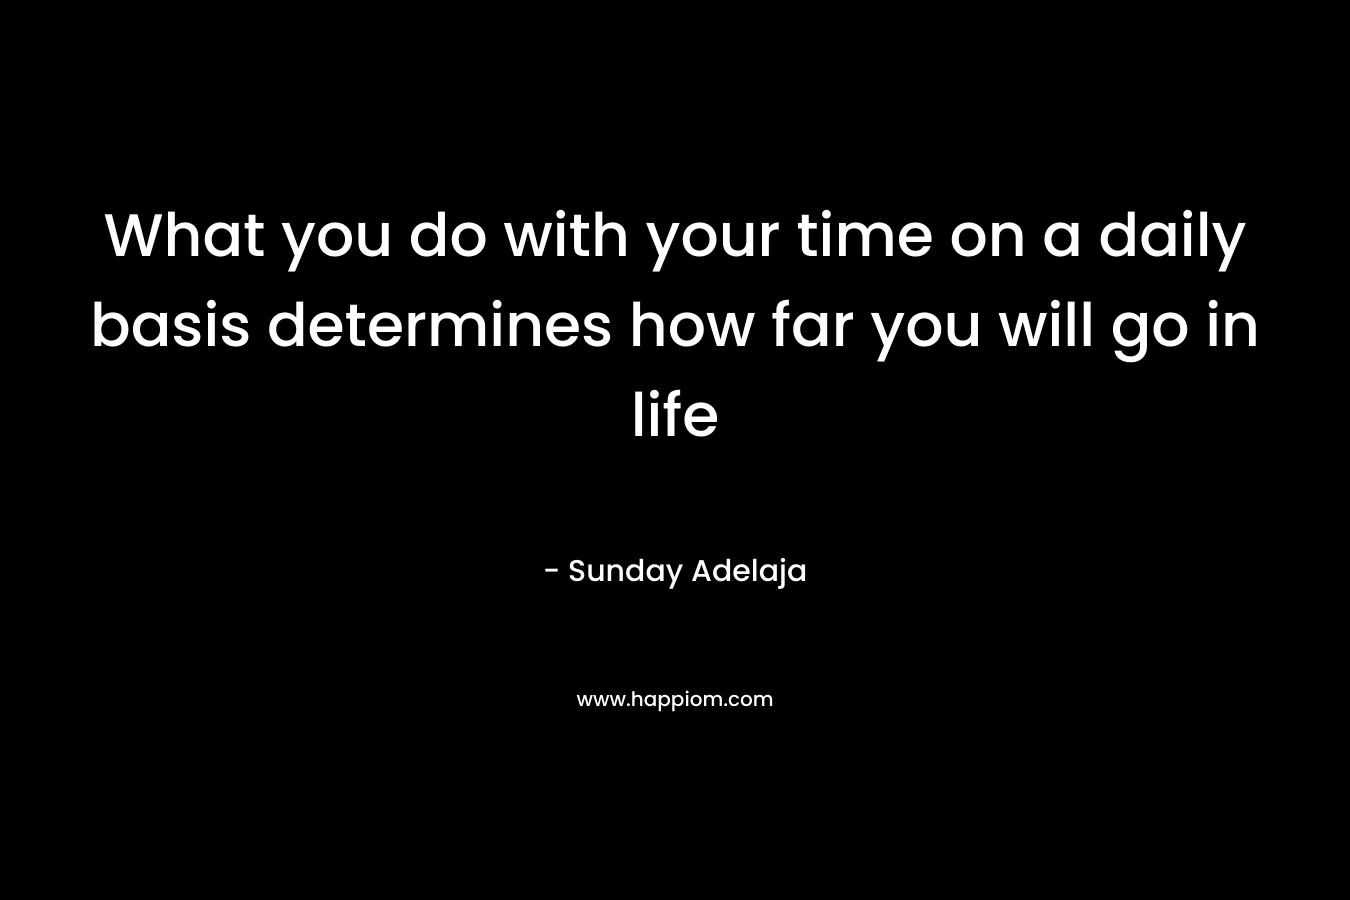 What you do with your time on a daily basis determines how far you will go in life